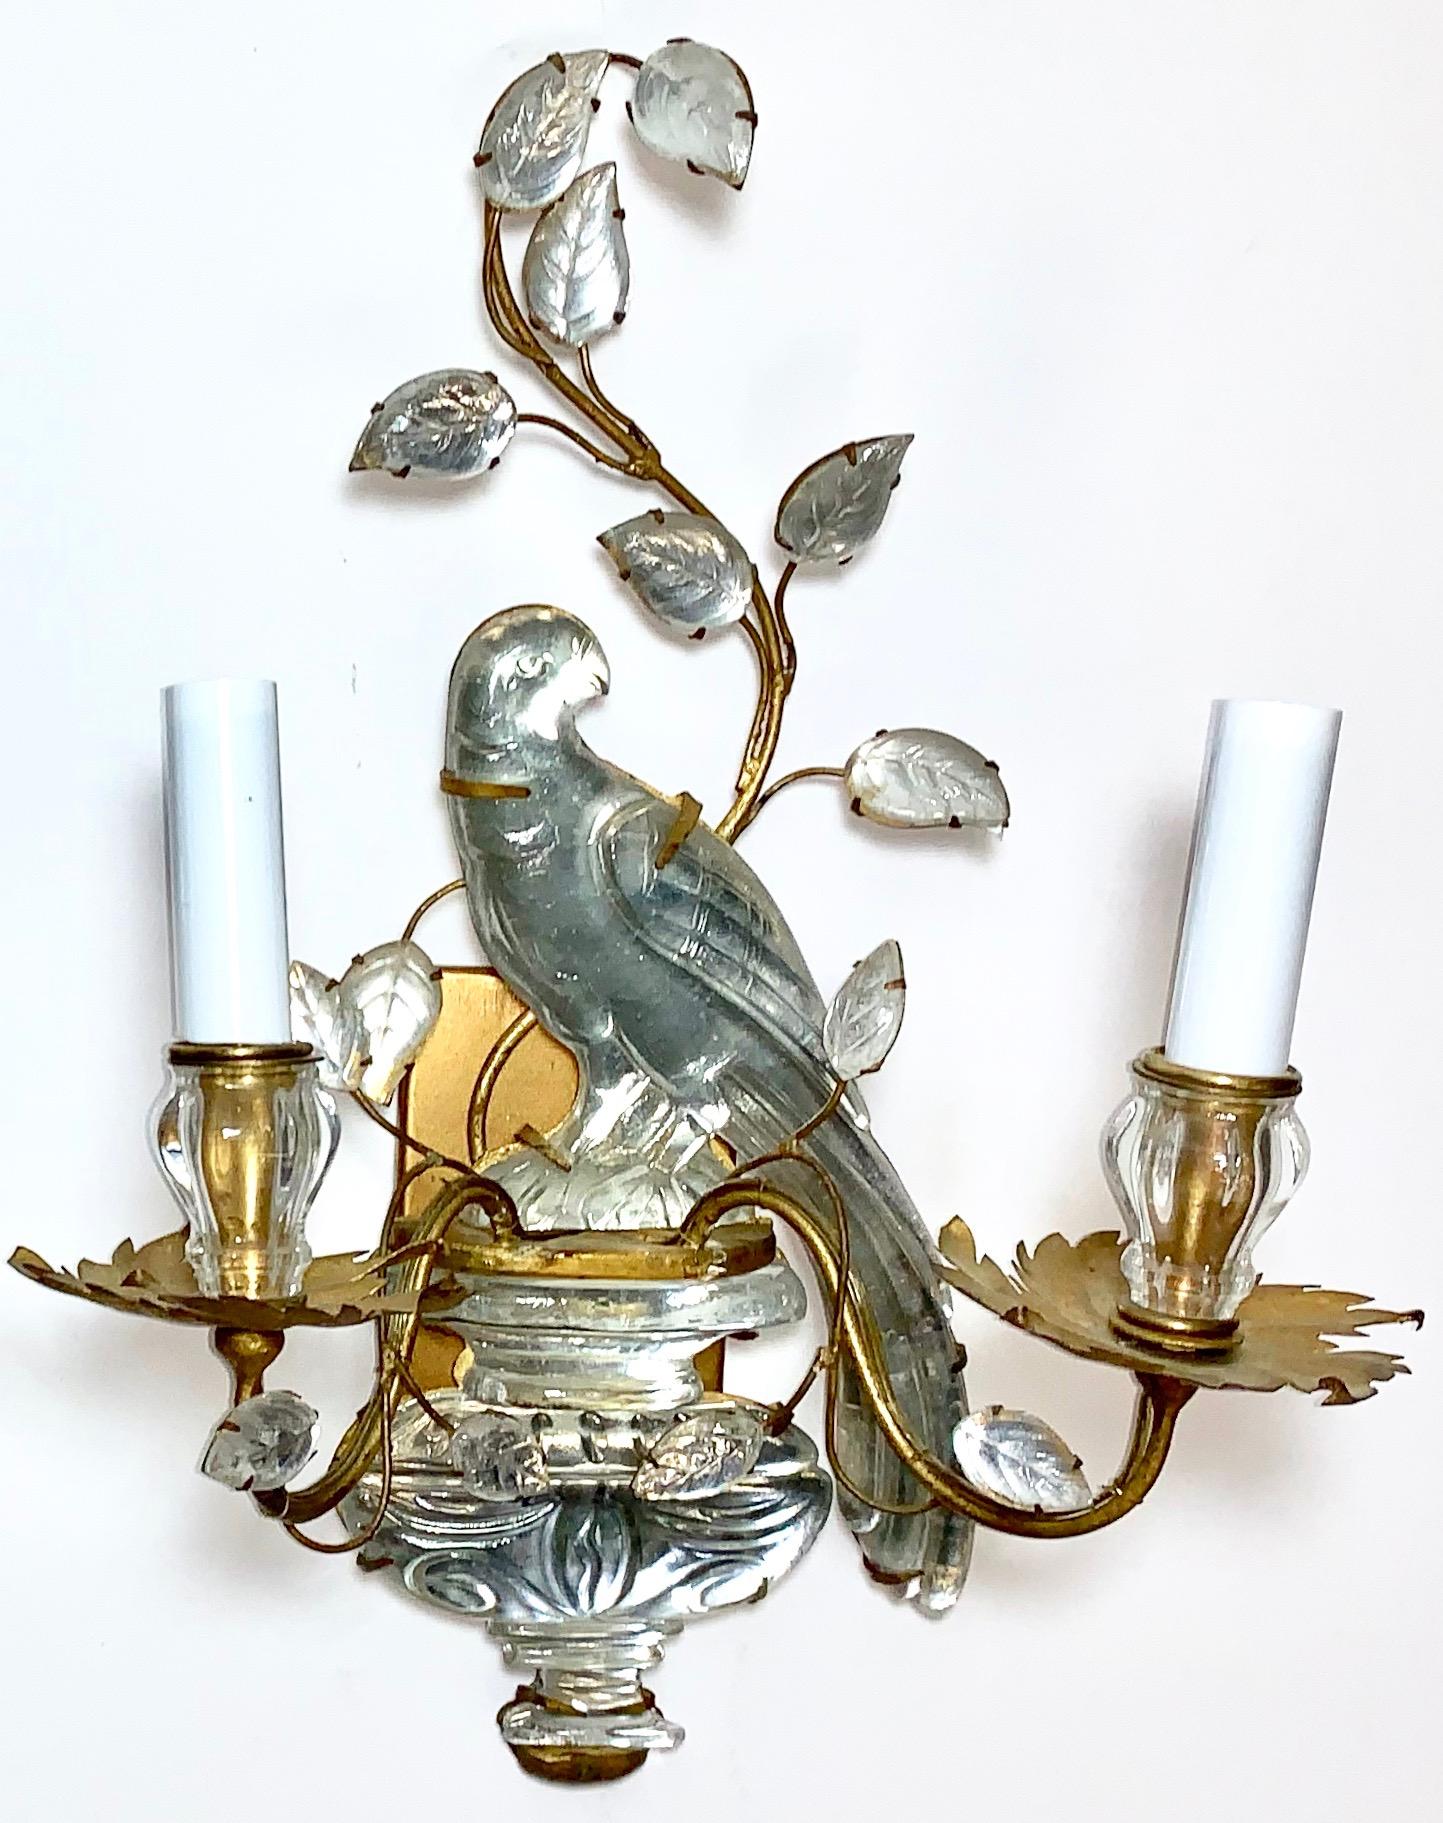 French pair of Art Deco period sconces made by Maison Baguès with crystal birds and foliage. The pair is in great vintage condition with some minor age-appropriate wear to the metal.